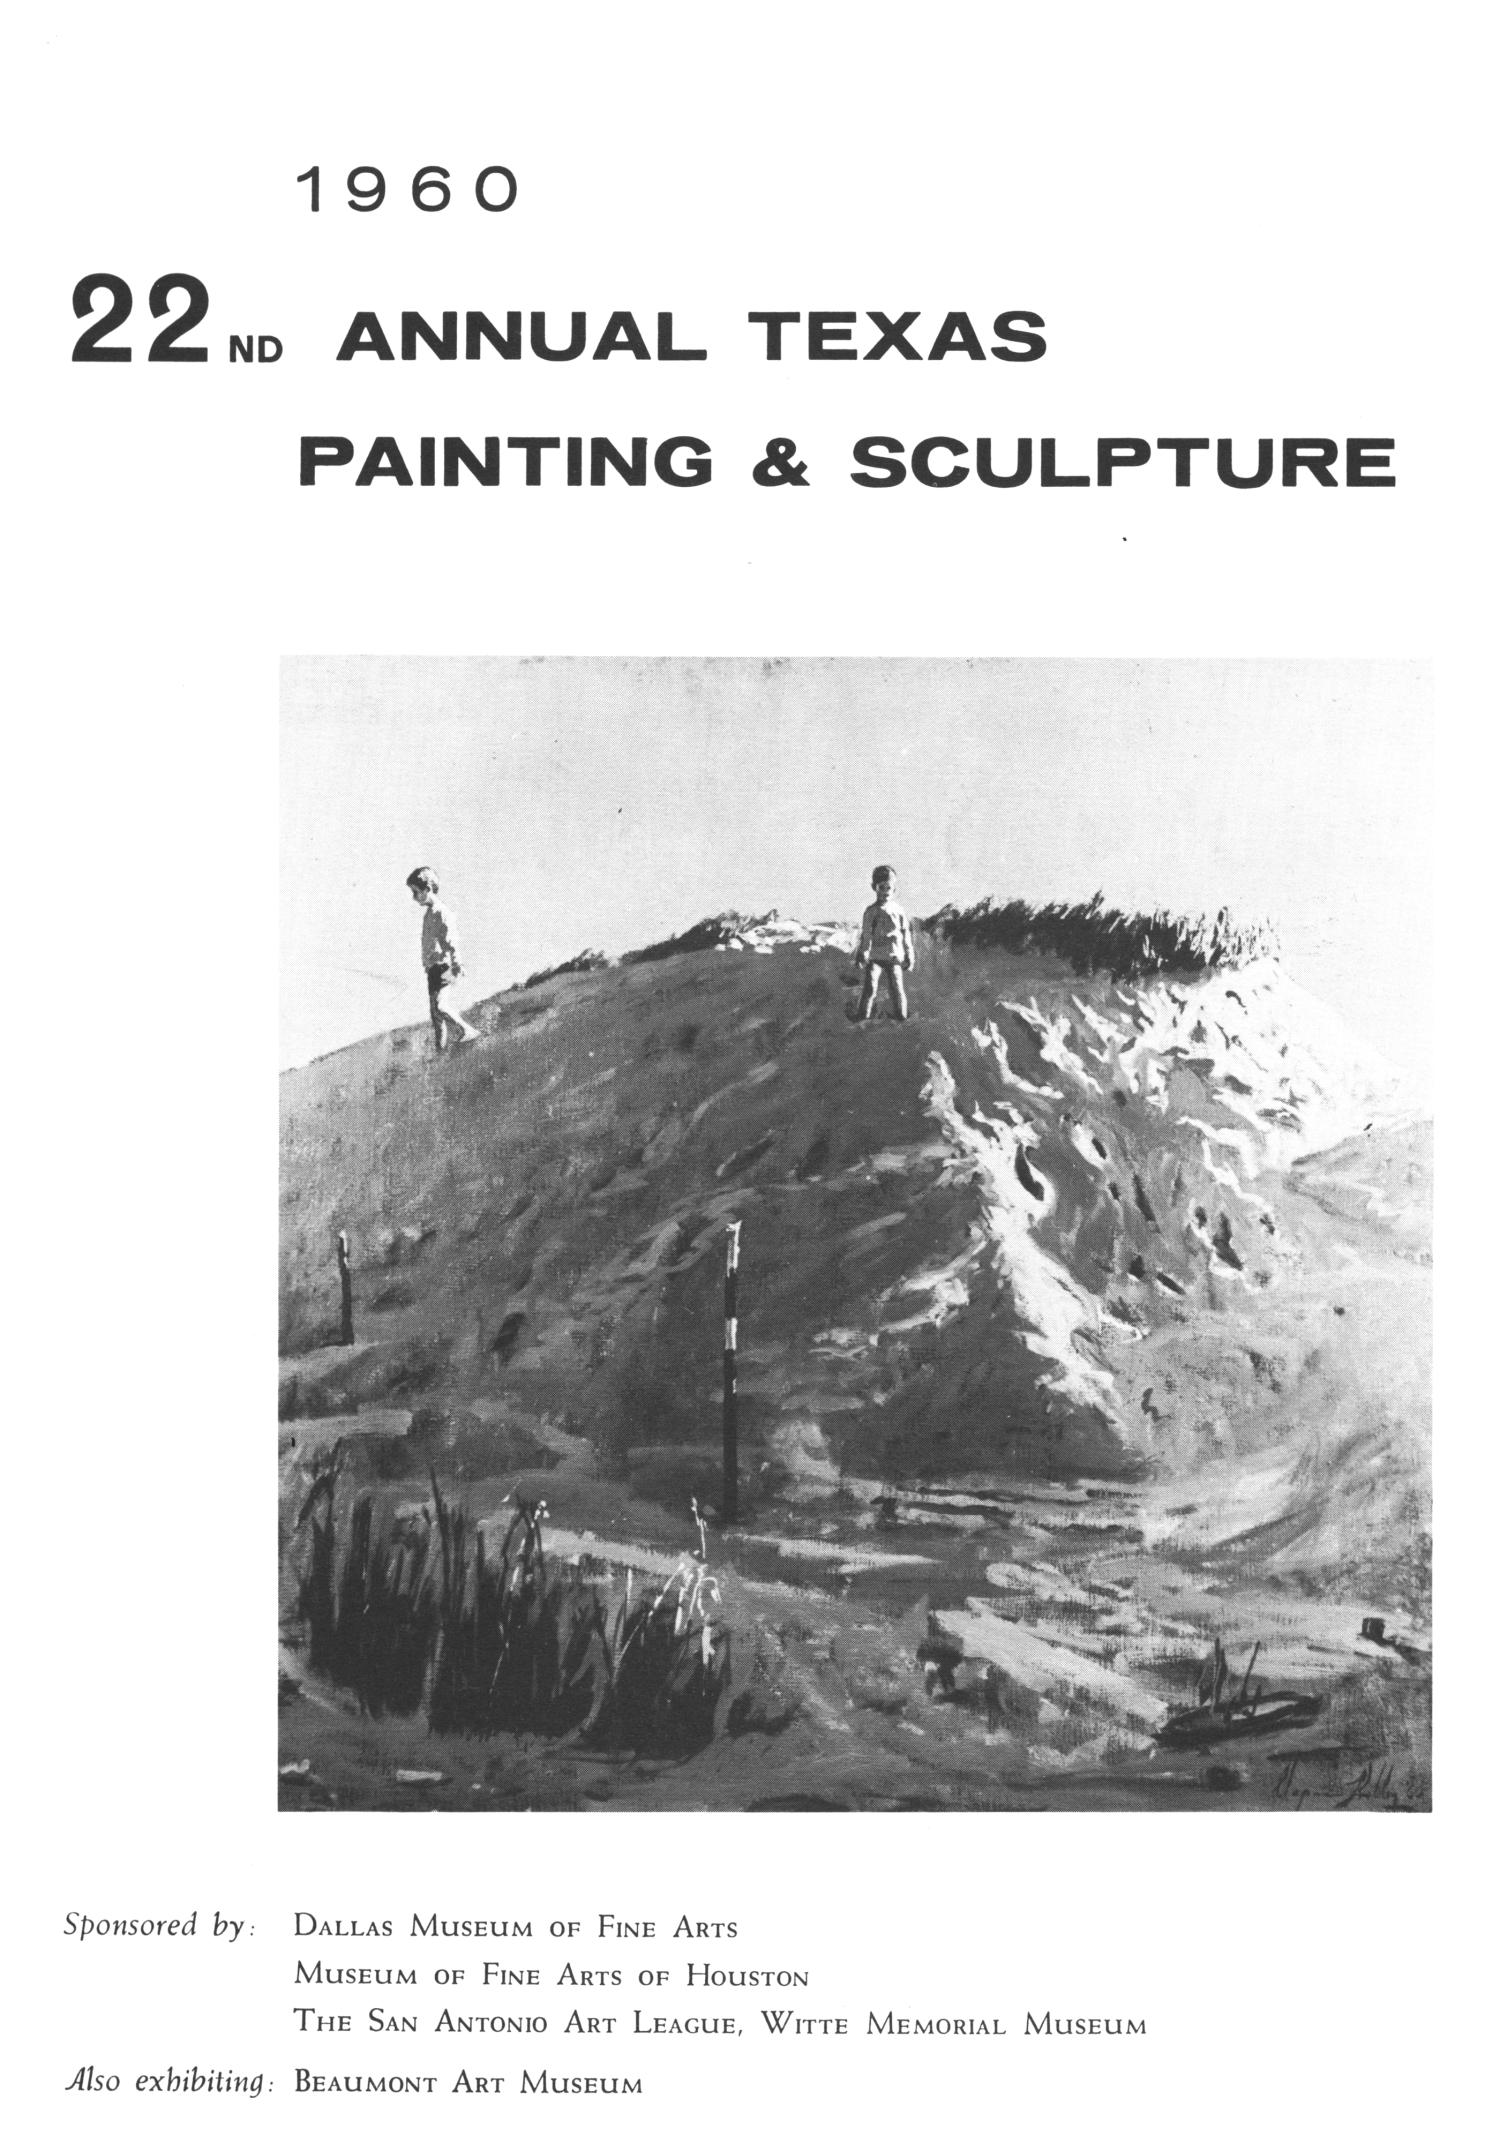 22nd Annual Texas Painting and Sculpture
                                                
                                                    Front Cover
                                                